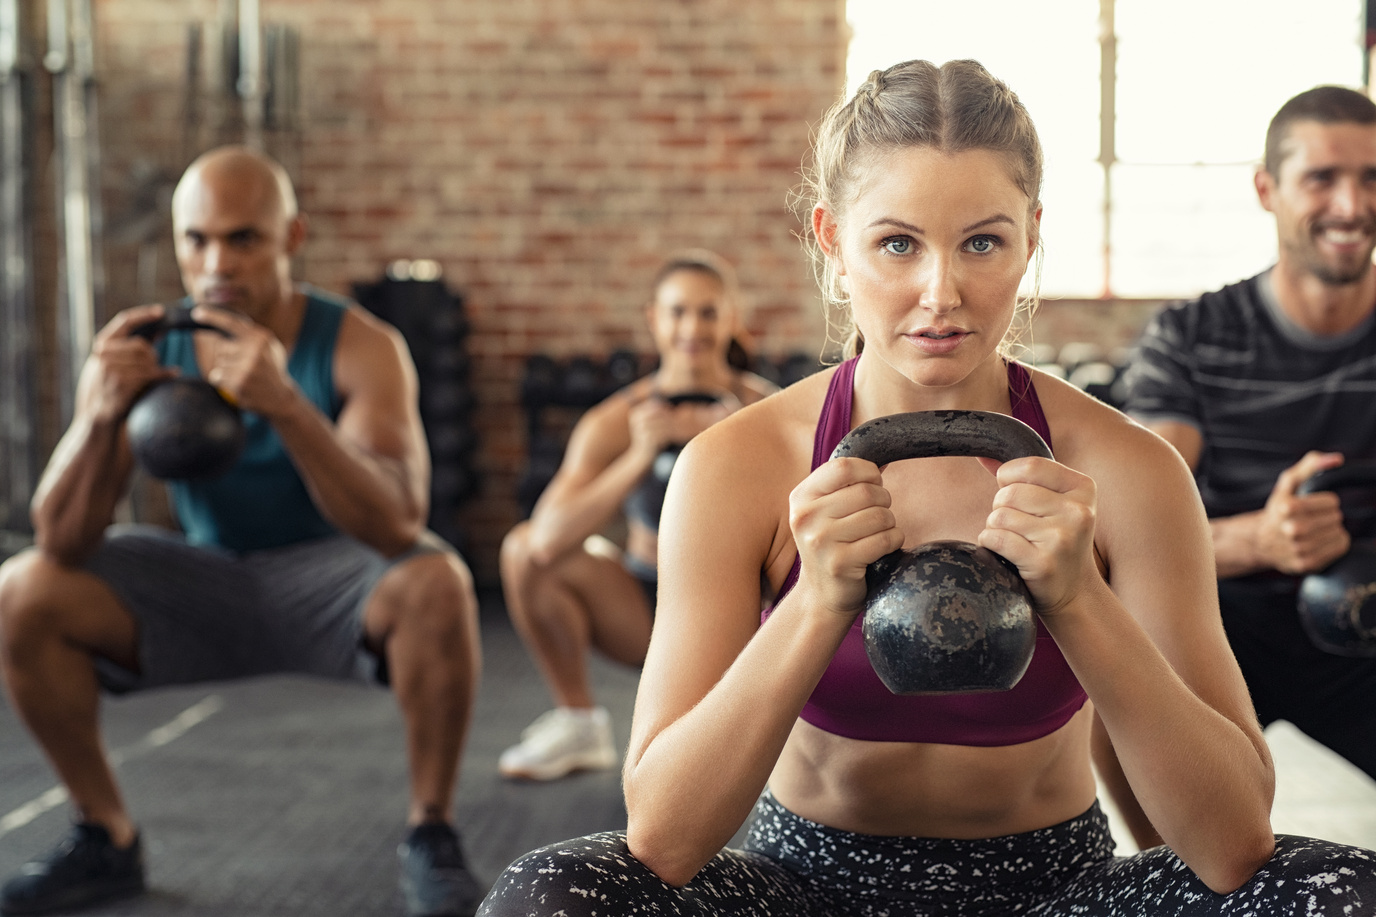 Woman Squatting with Kettle Bell at the Gym